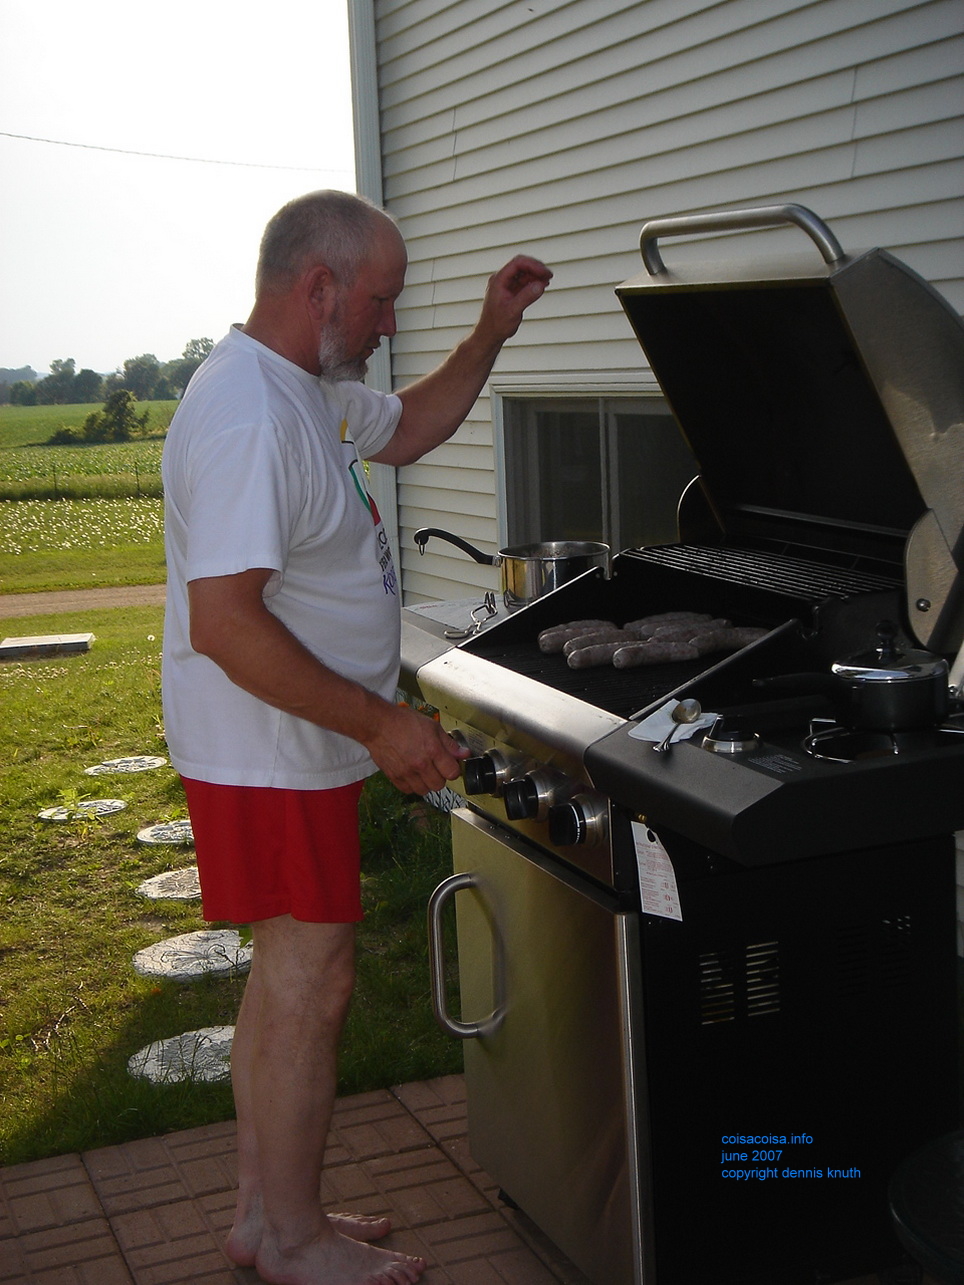 Gary has some bratwurst on the Grill